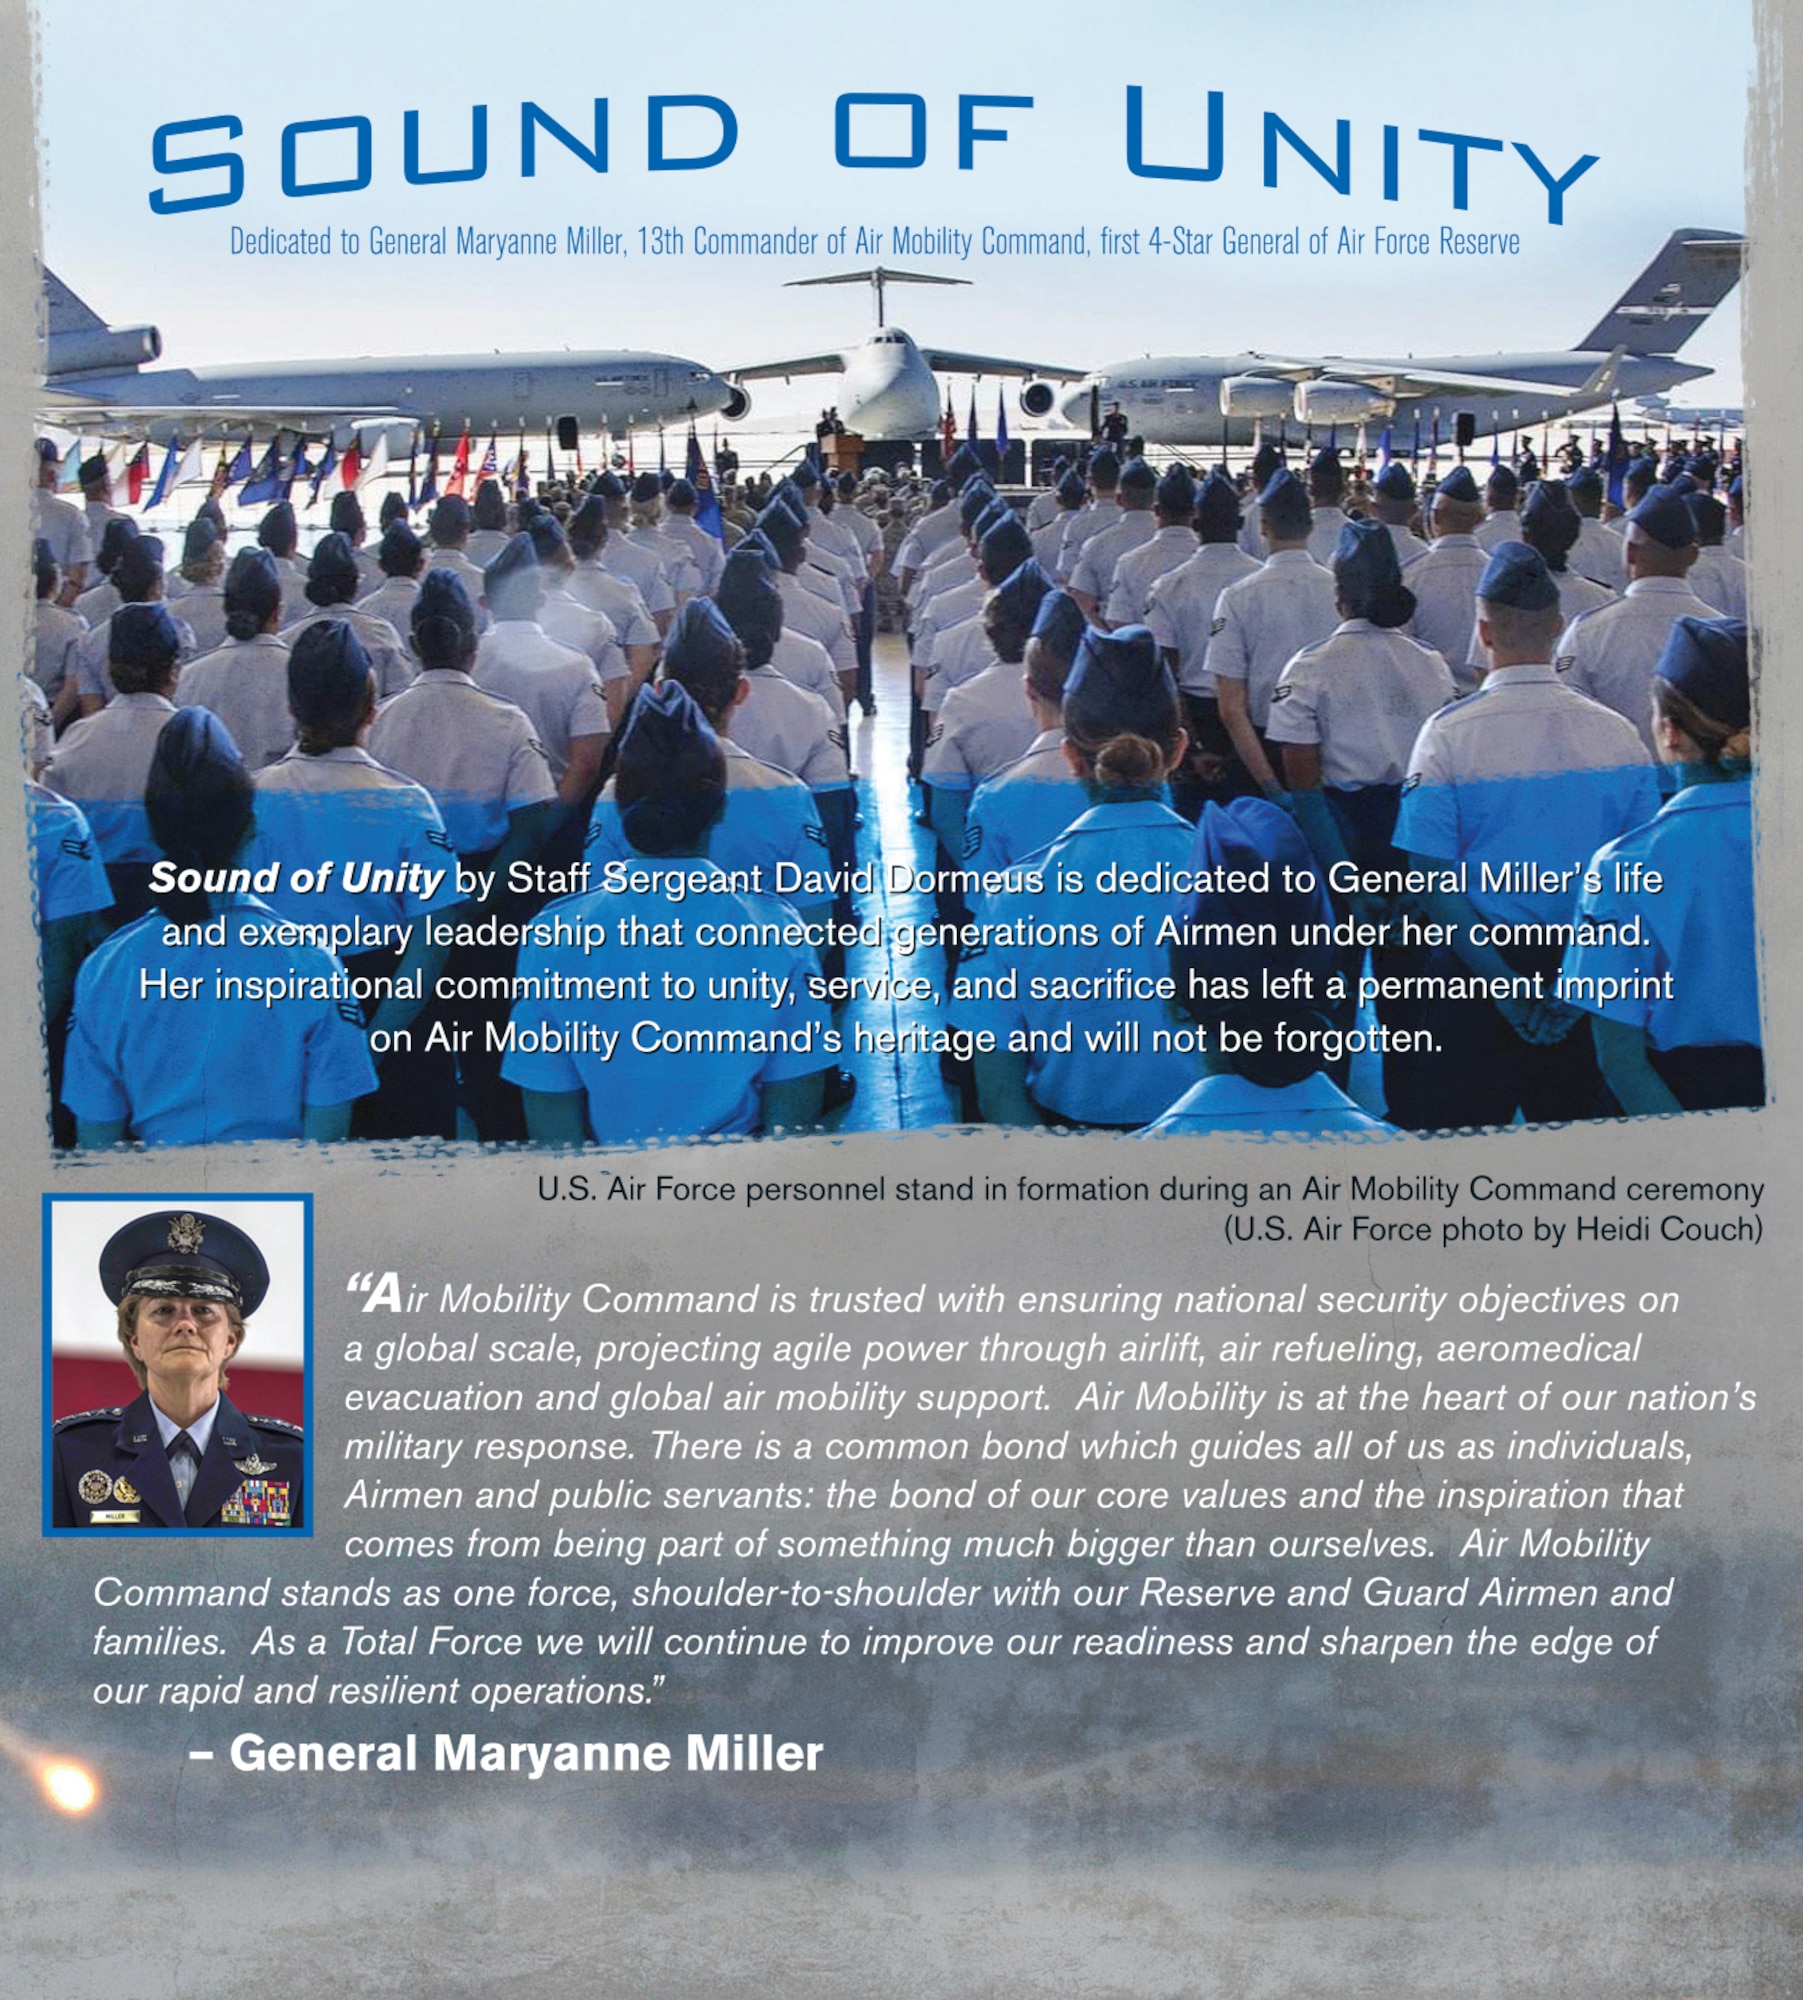 A page from the liner notes of the U.S. Air Force Band of the Golden West album “American Tapestry” highlights the composition “Sound of Unity.” The composition is dedicated to Maryanne Miller, a former four-star general and commander of Air Mobility Command who retired in October. Miller served as commander of the 349th Air Mobility Wing at Travis from January 2008 to November 2009. (U.S. Air Force graphic/Everett Rein)